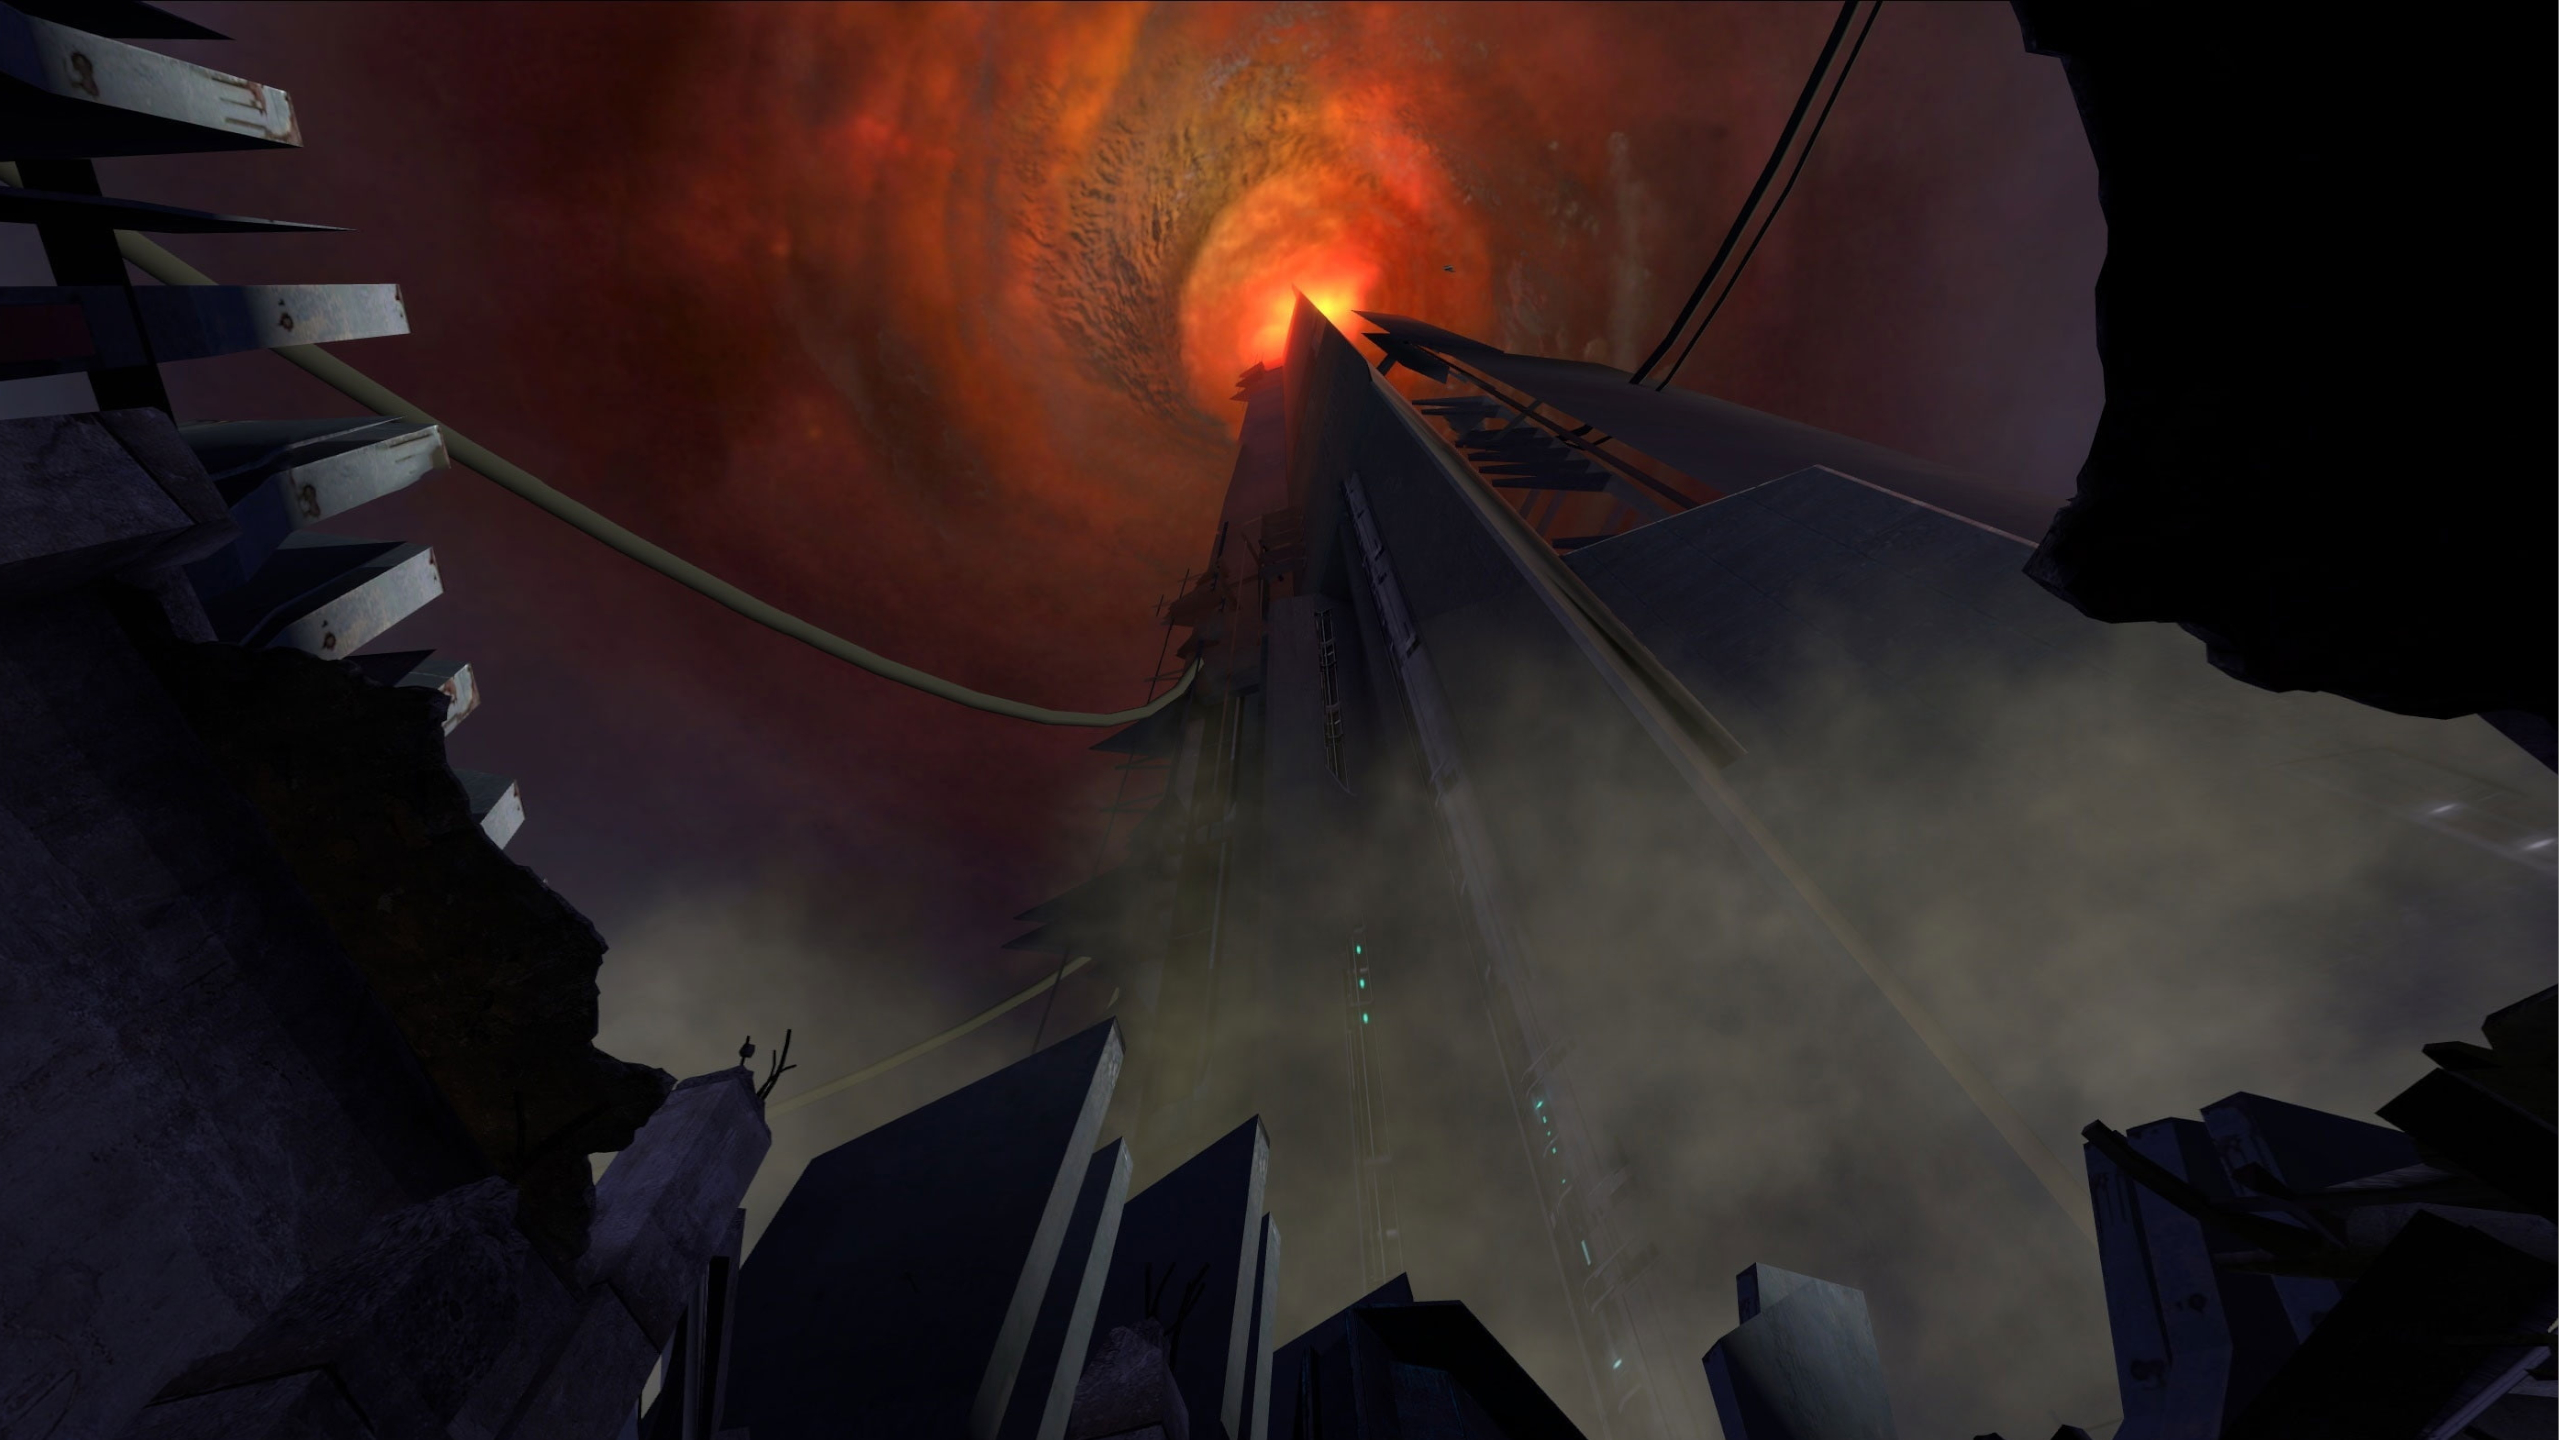 General 2560x1440 Half-Life 2: Episode One Half-Life 2 Citadel red sky apocalyptic storm clouds video games